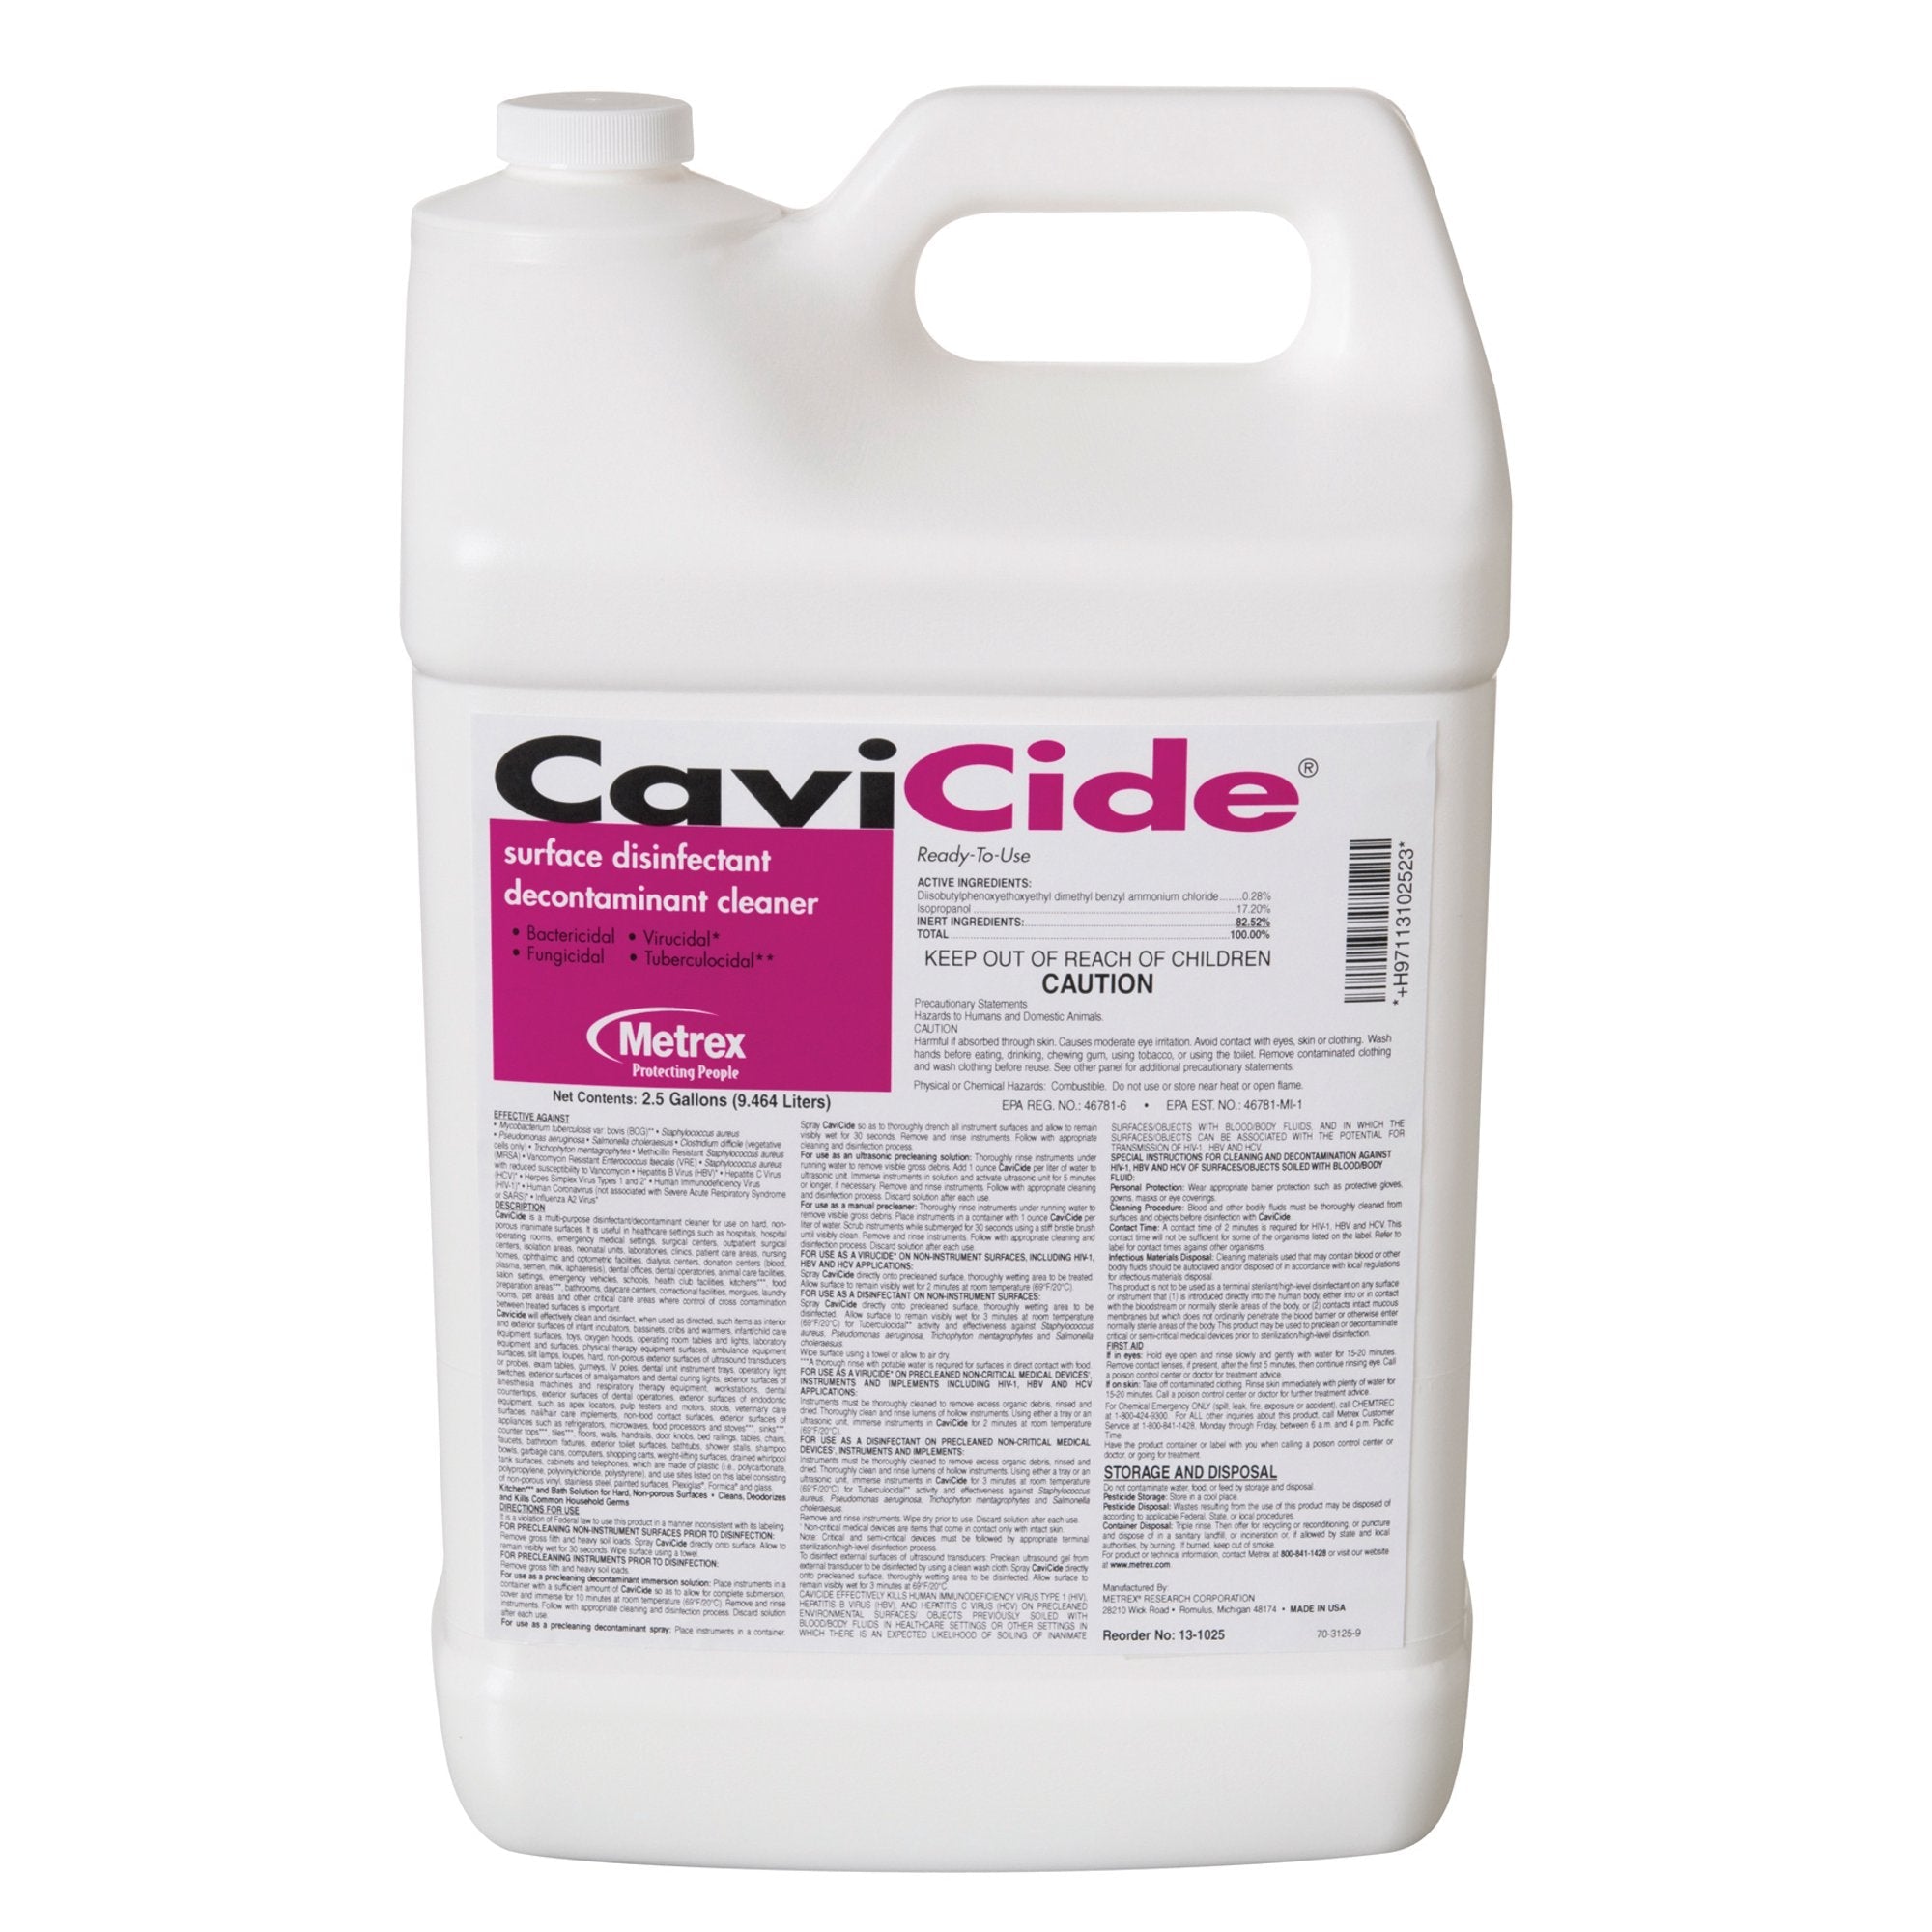 * Metrex 13-1025 CaviCide Surface Disinfectant/Decontaminant Cleaner, 2.5 gal Capacity